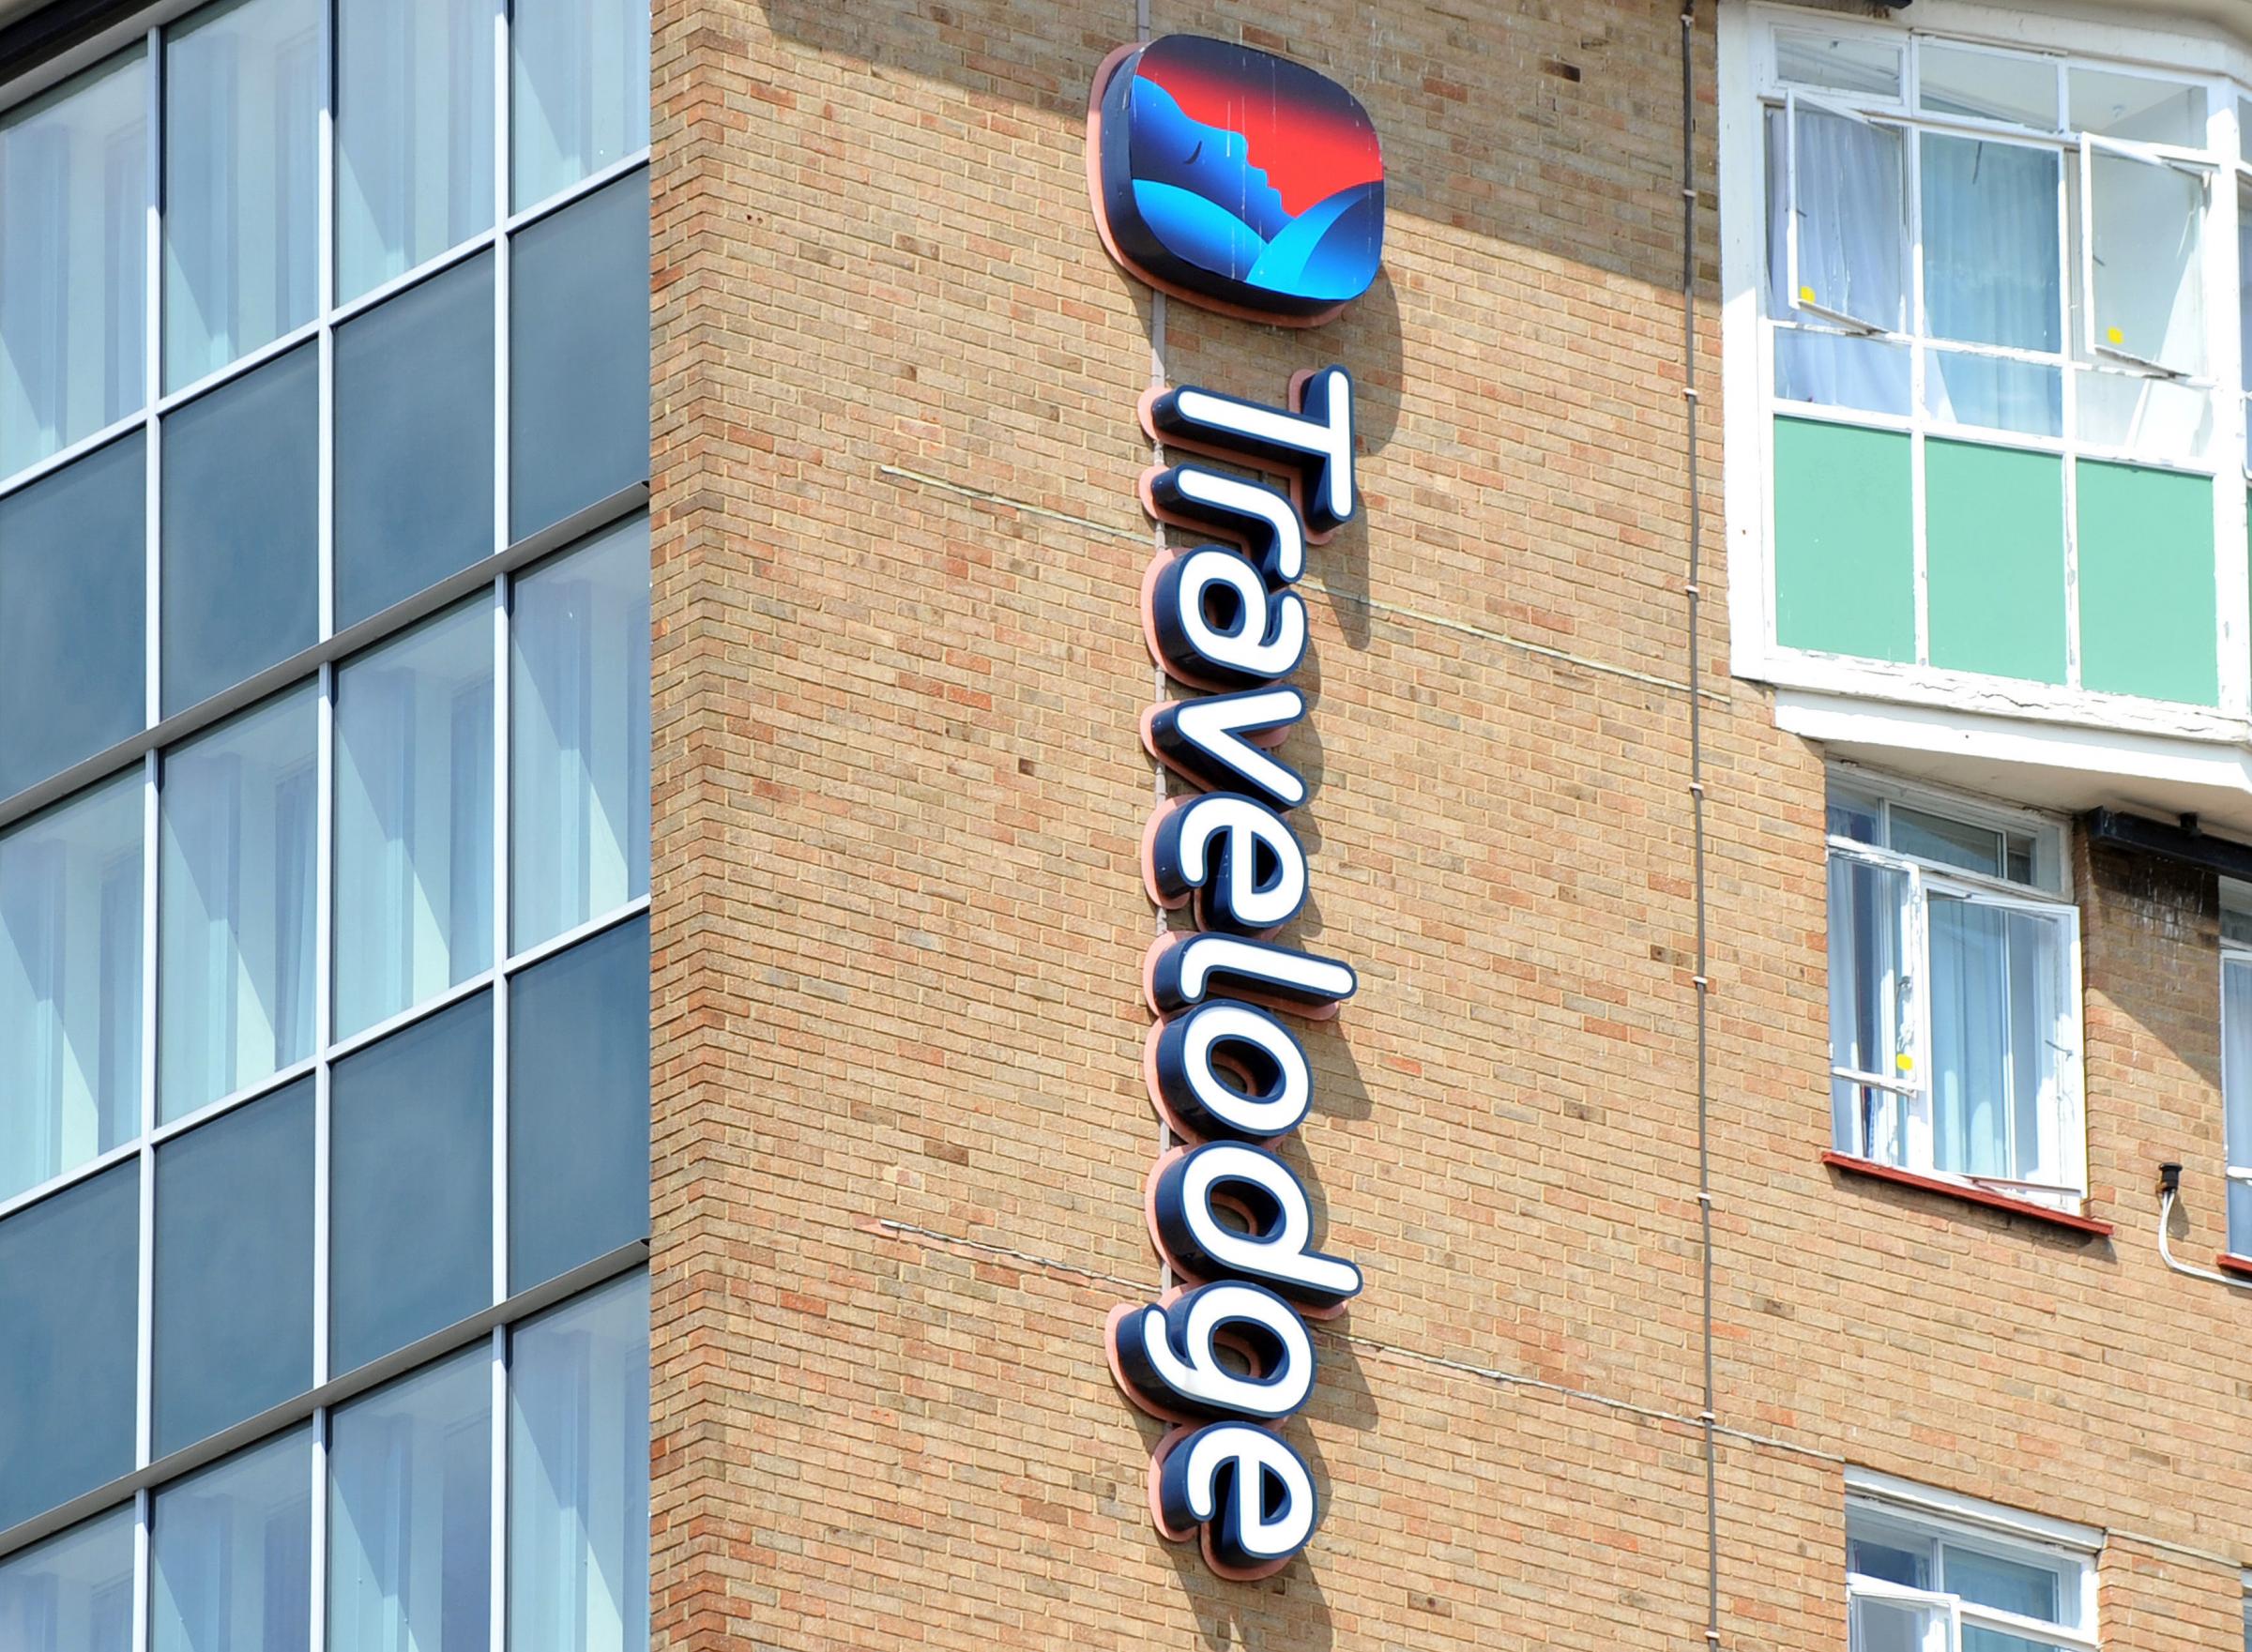 Travelodge: Chain targets 13 locations in south east London